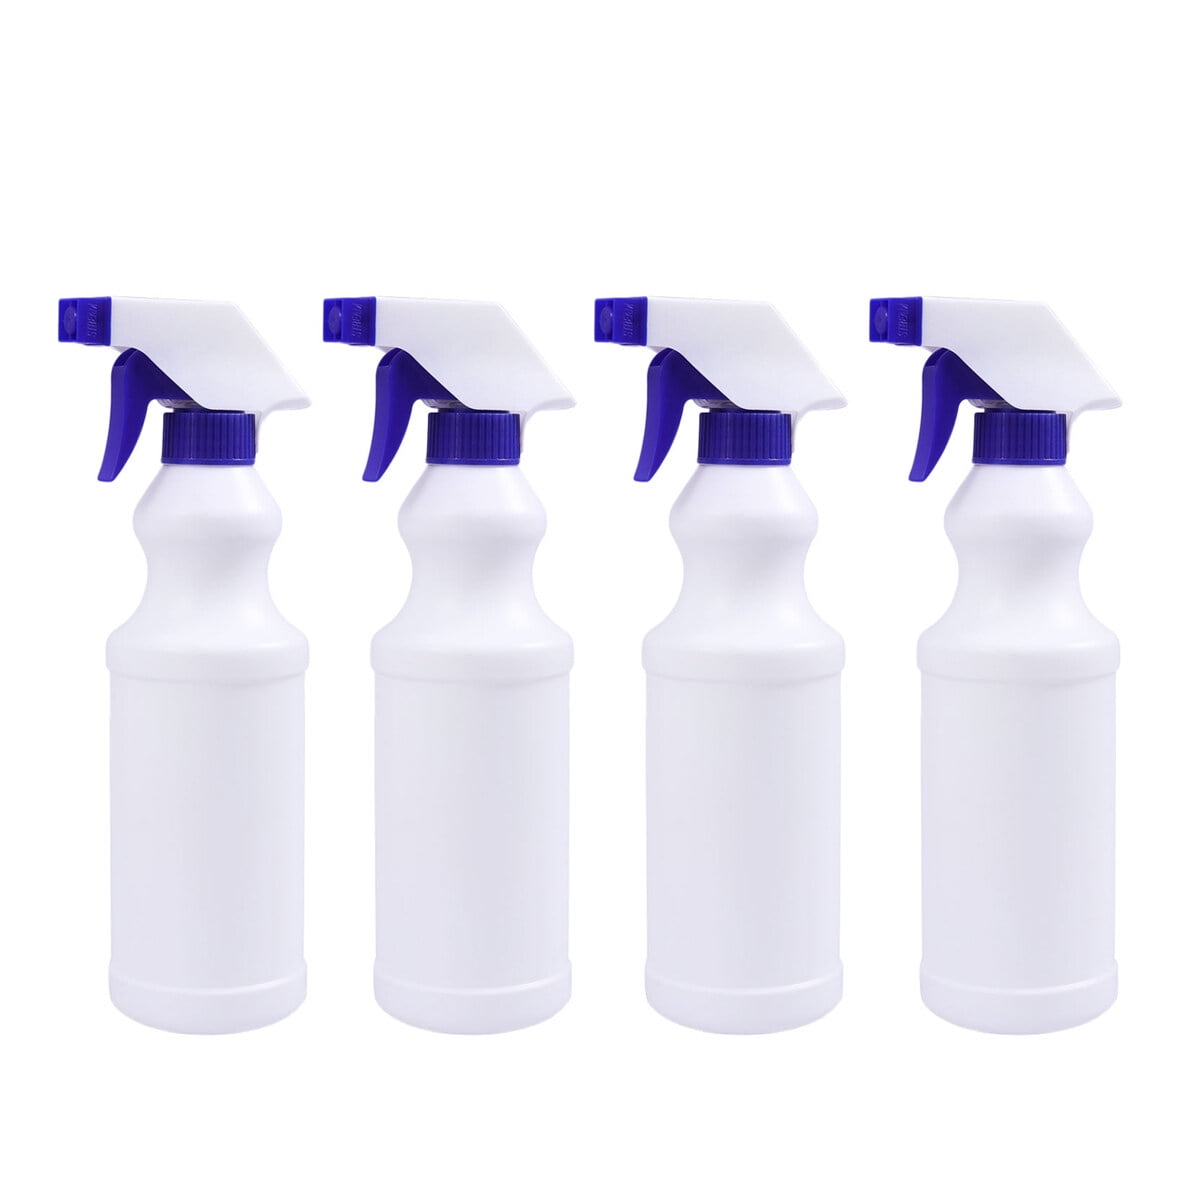  EZPRO USA Transparent Empty Spray Bottles 32 oz 4 Pack, Industrial Sprayer, Heavy-Duty Spray for Hair, Pet Grooming Cat Training, Auto Car Detailing, Cleaning Janitorial